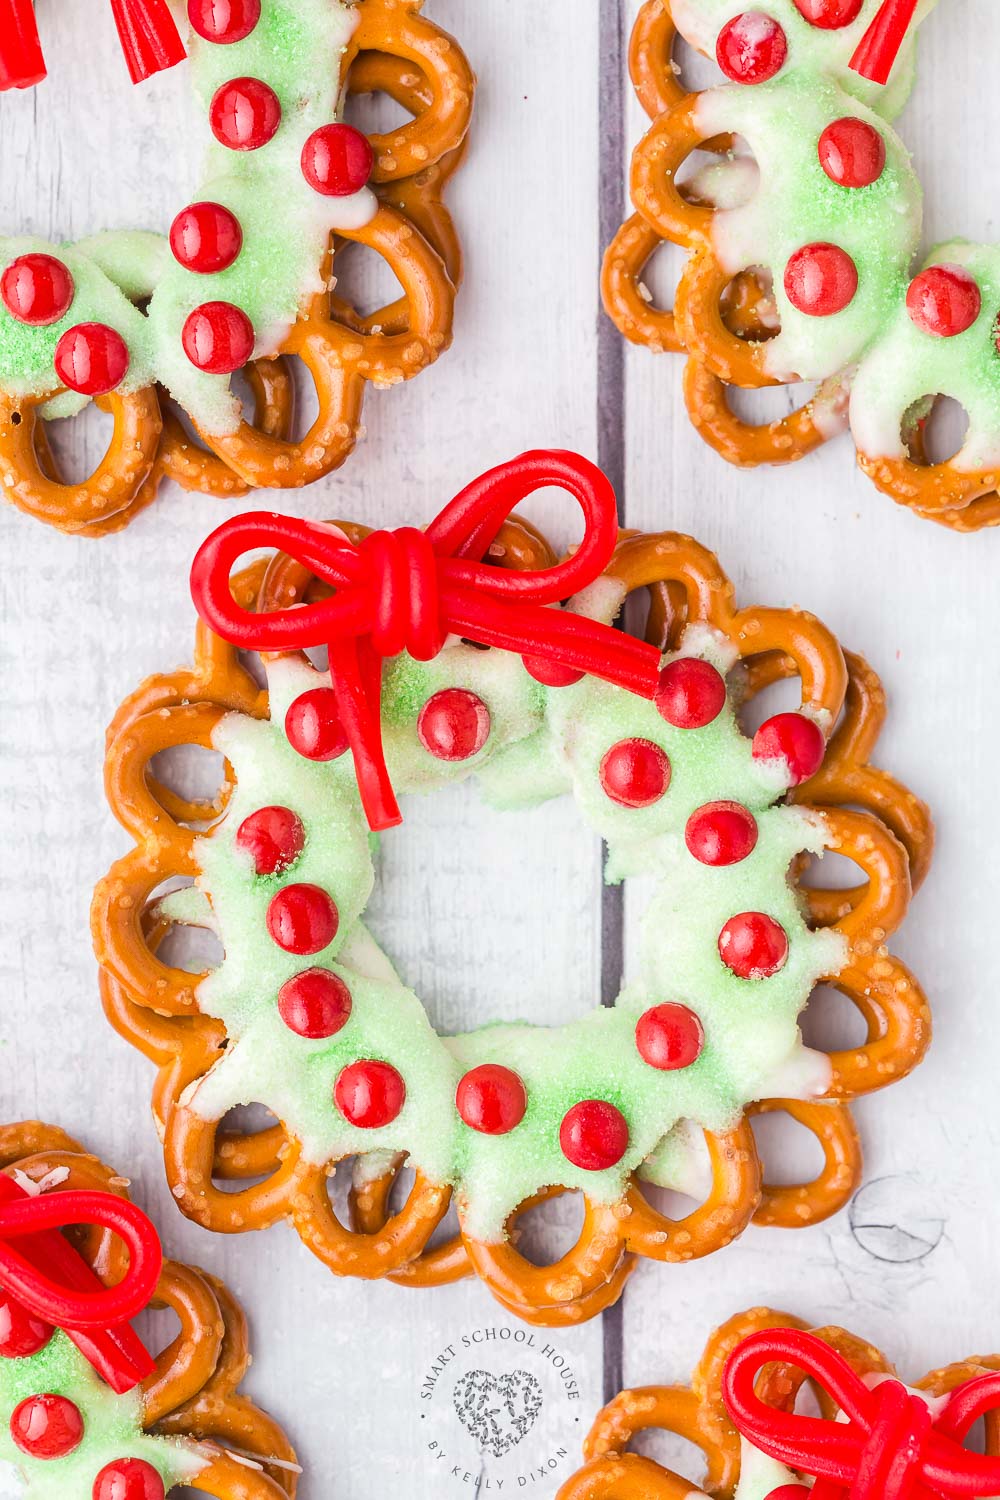 Pretzel Wreaths with a red licorice bow are an adorable and festive Christmas food craft idea! A favorite holiday treat.